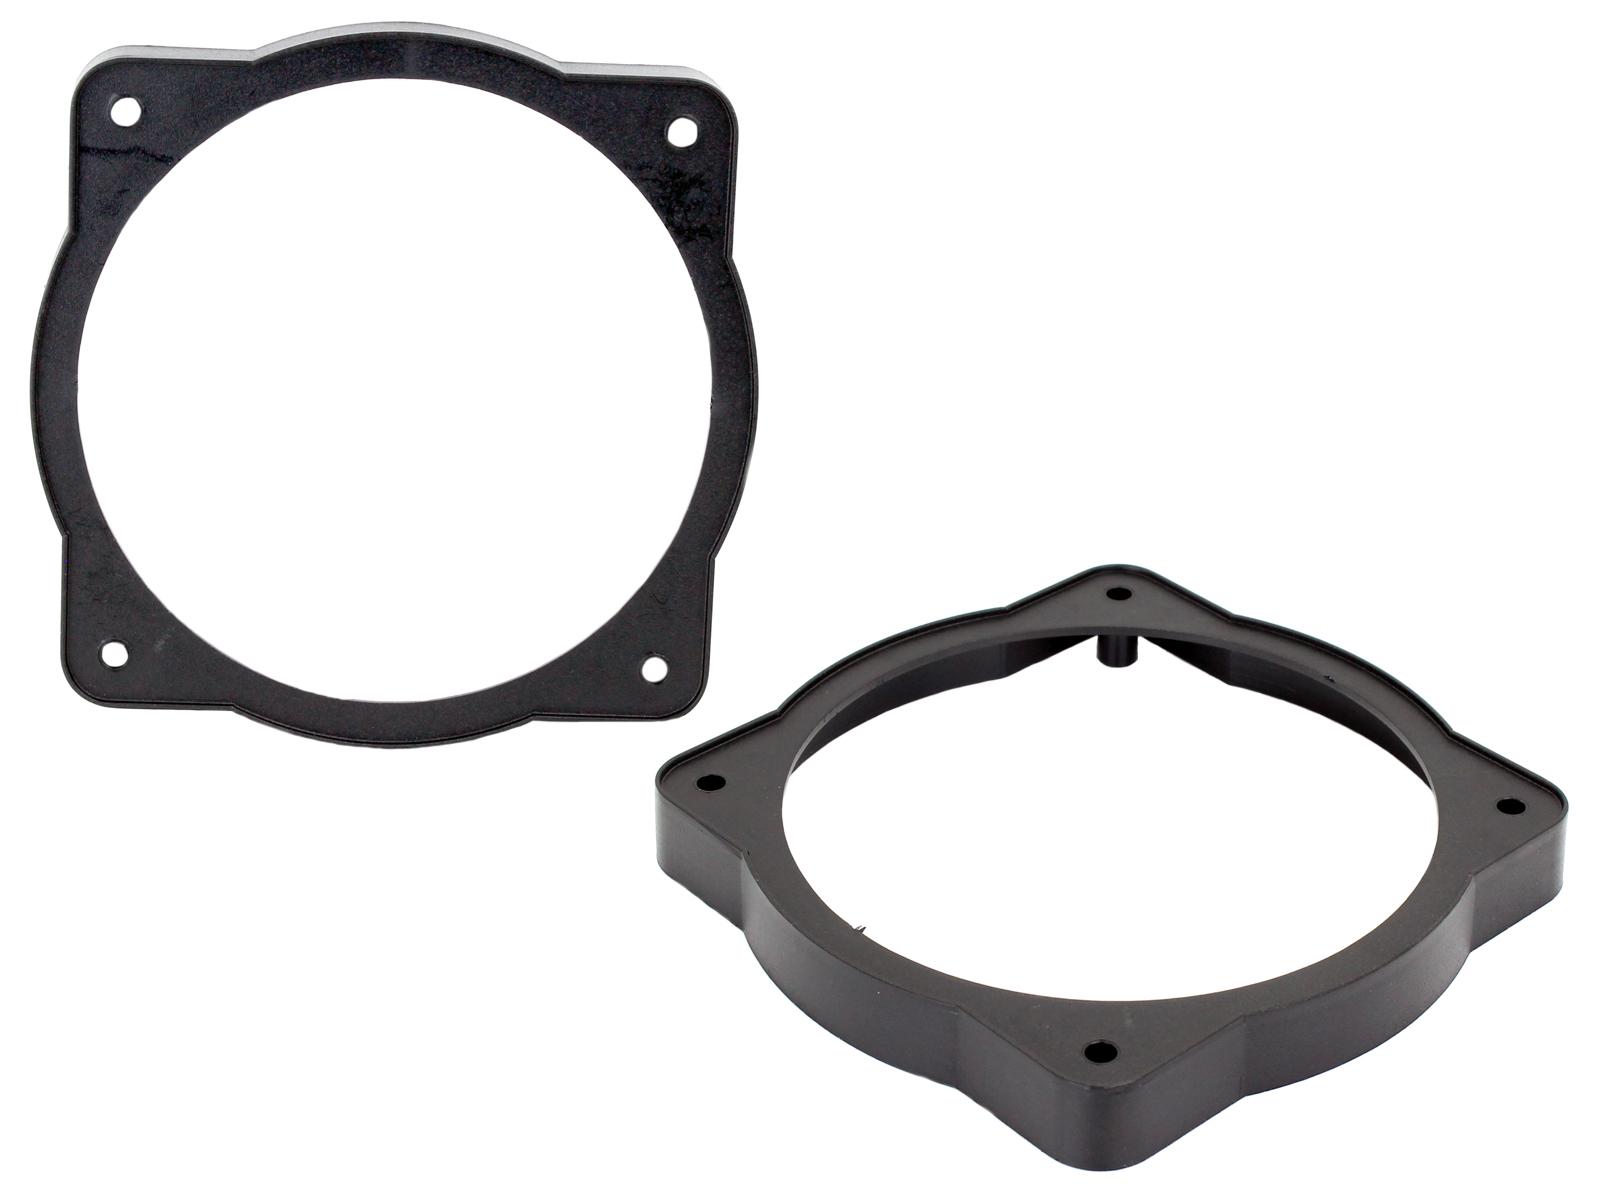 Kit 6 Speakers for FIAT GRANDE PUNTO Alpine with adapters and spacer rings 